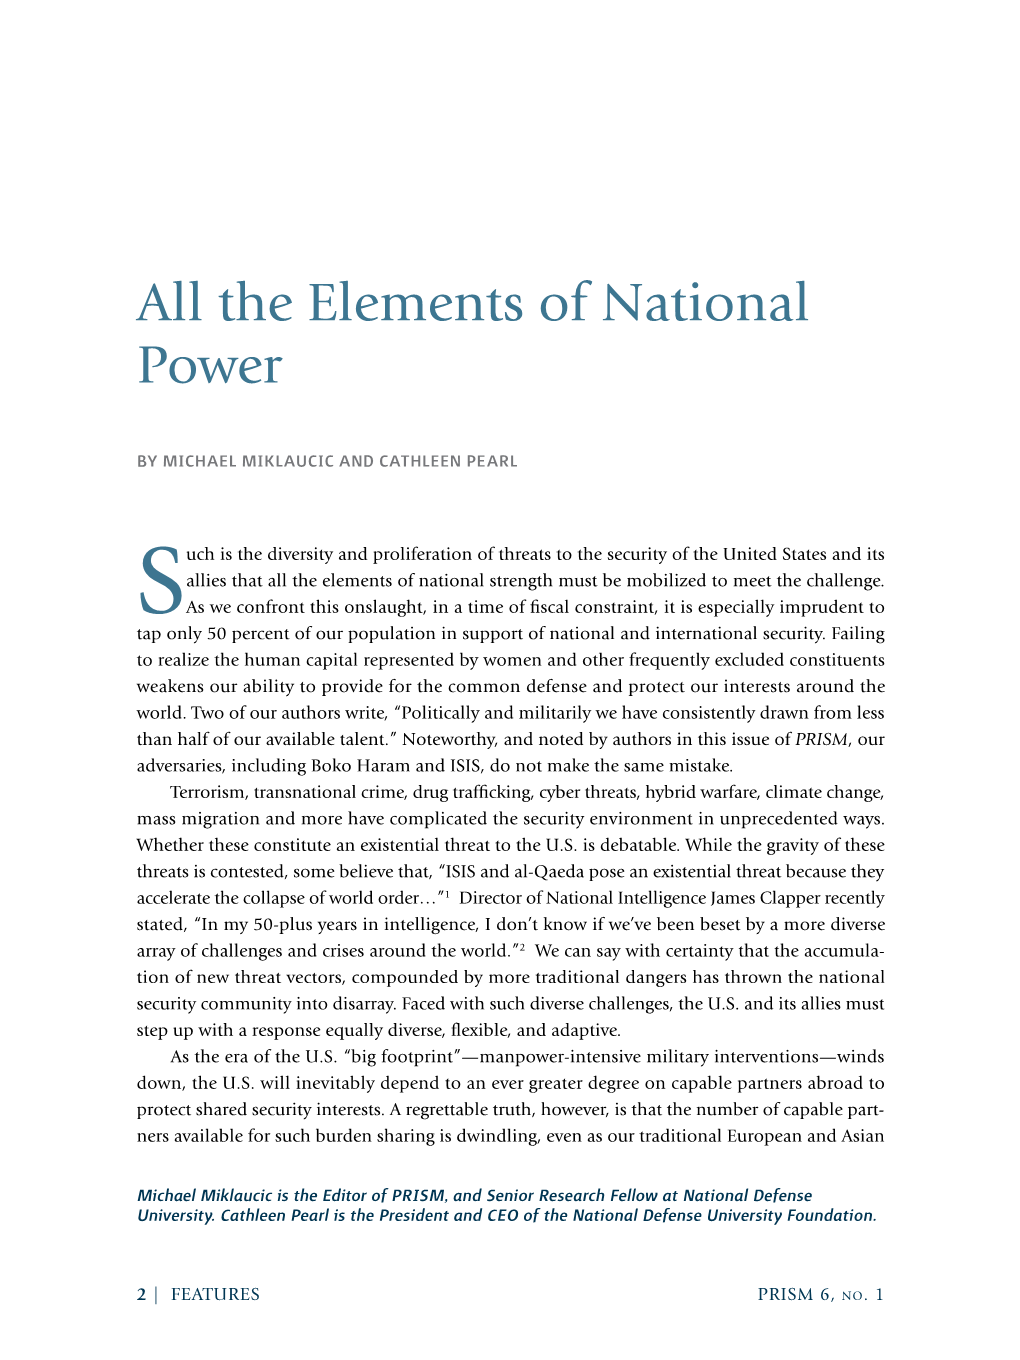 All the Elements of National Power